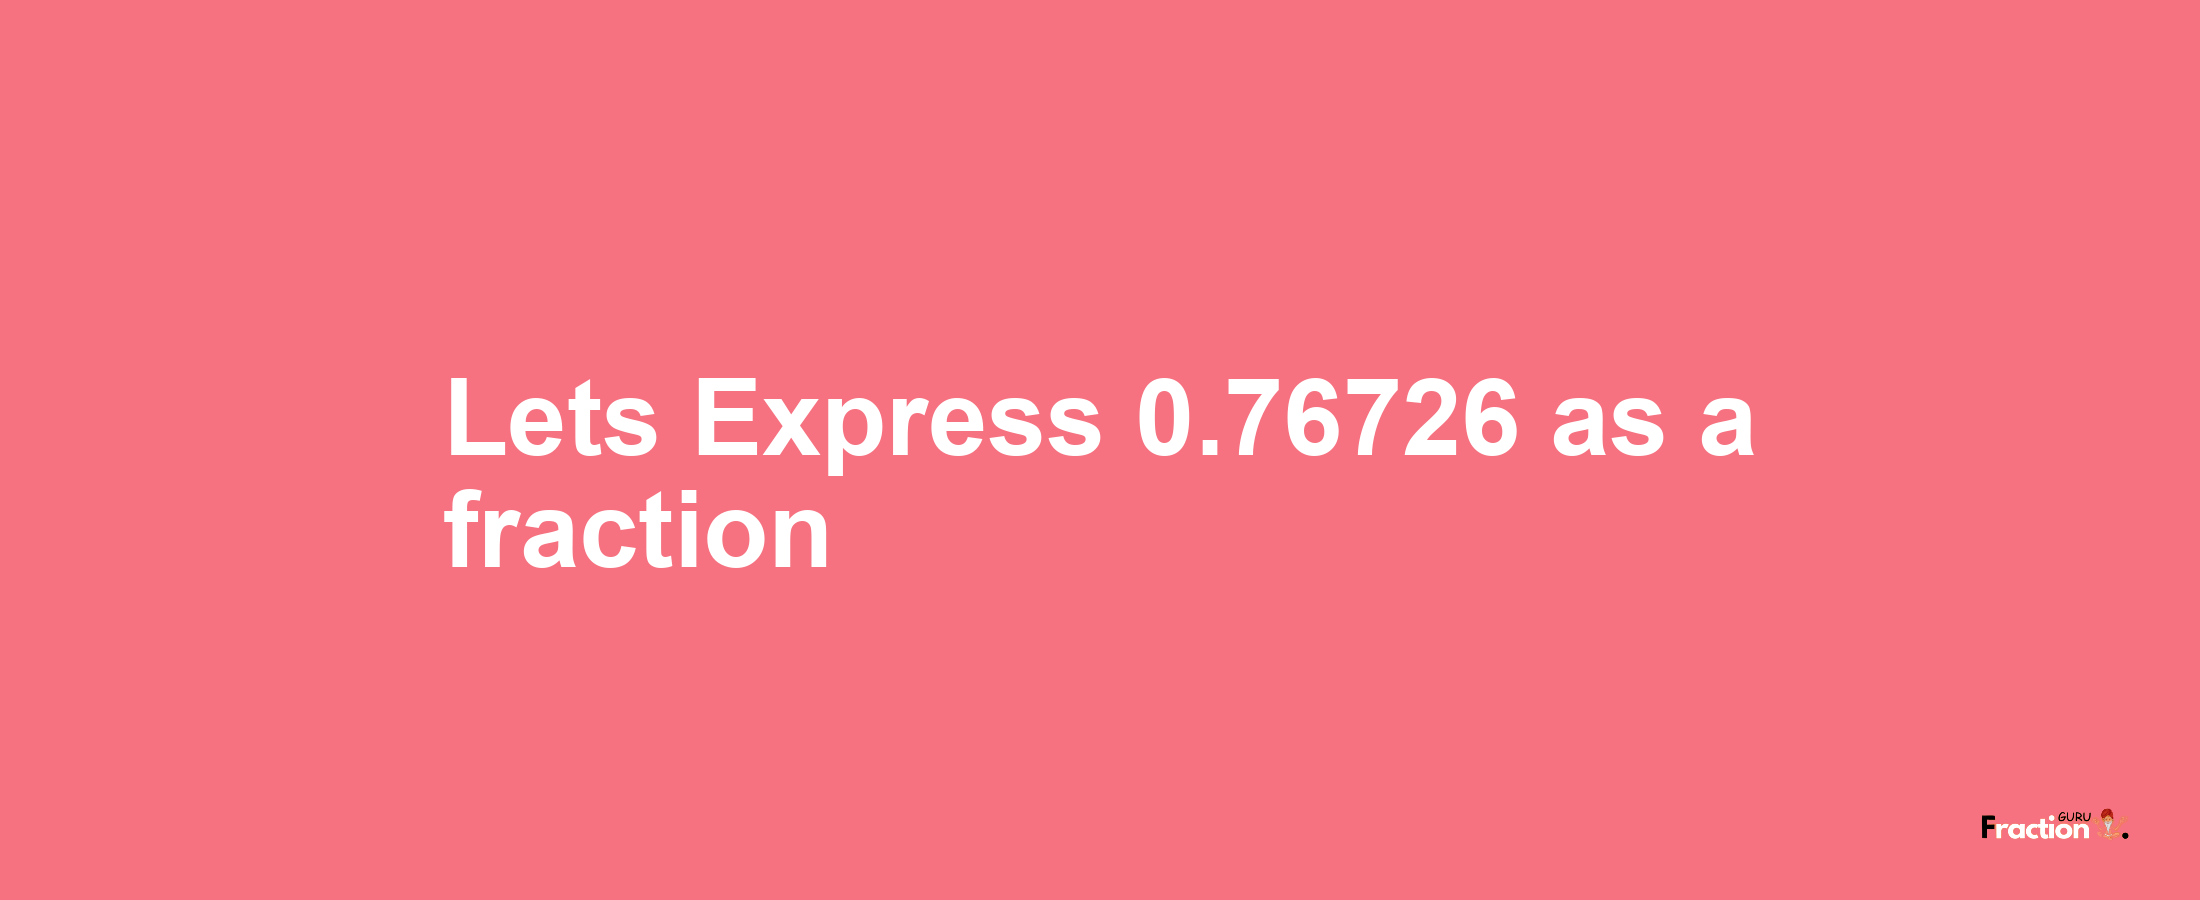 Lets Express 0.76726 as afraction